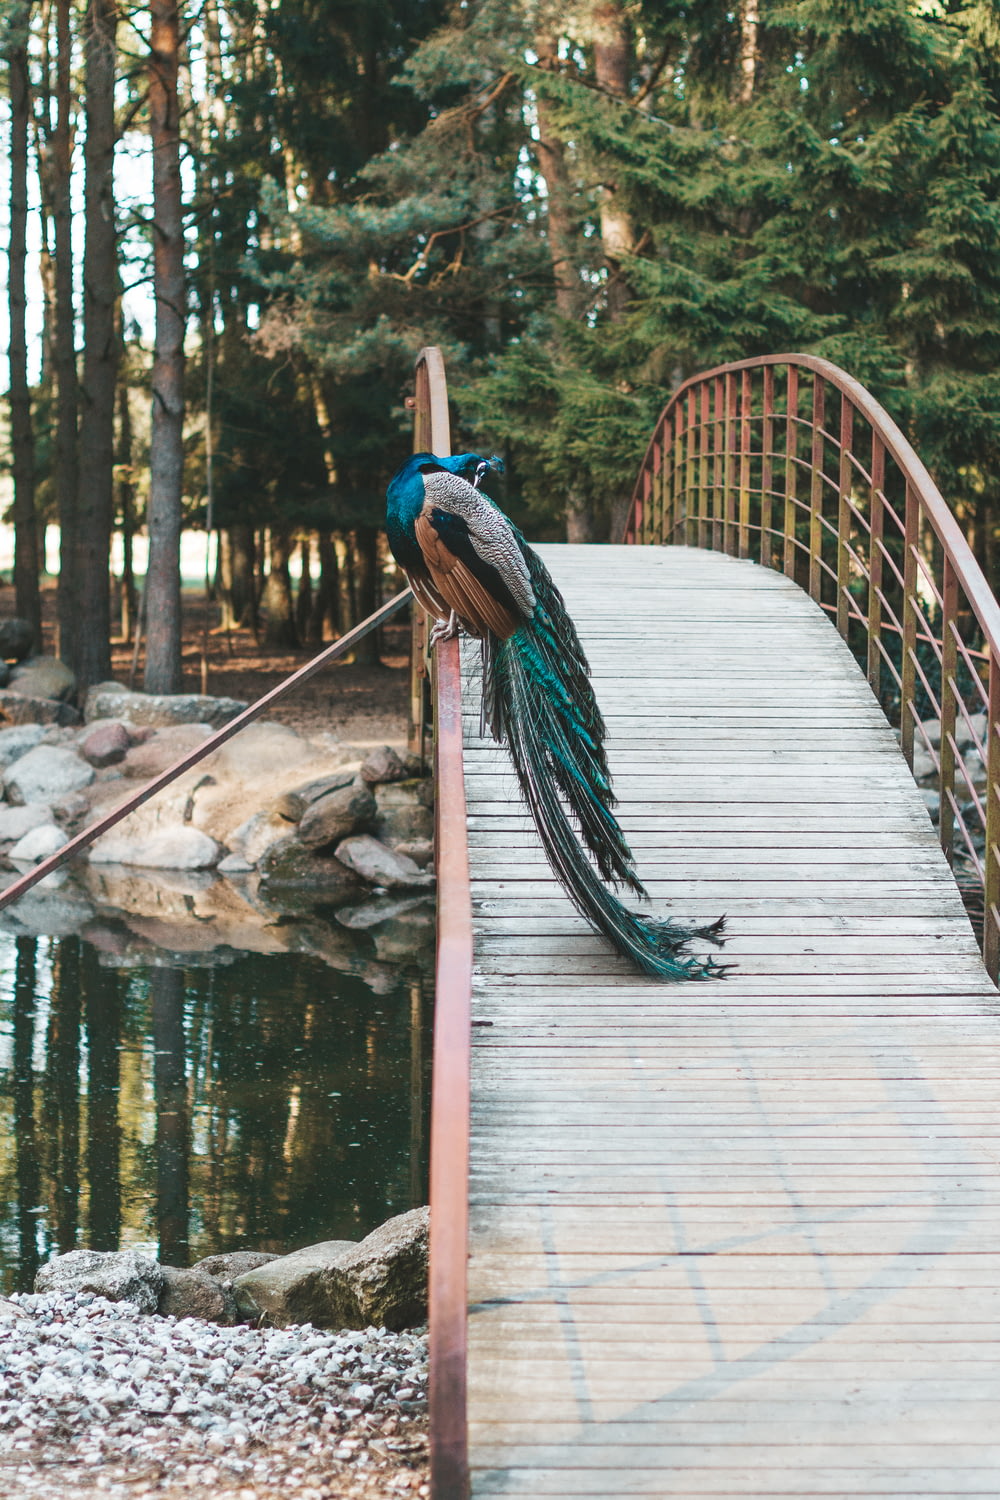 peacock perched on foot bridge